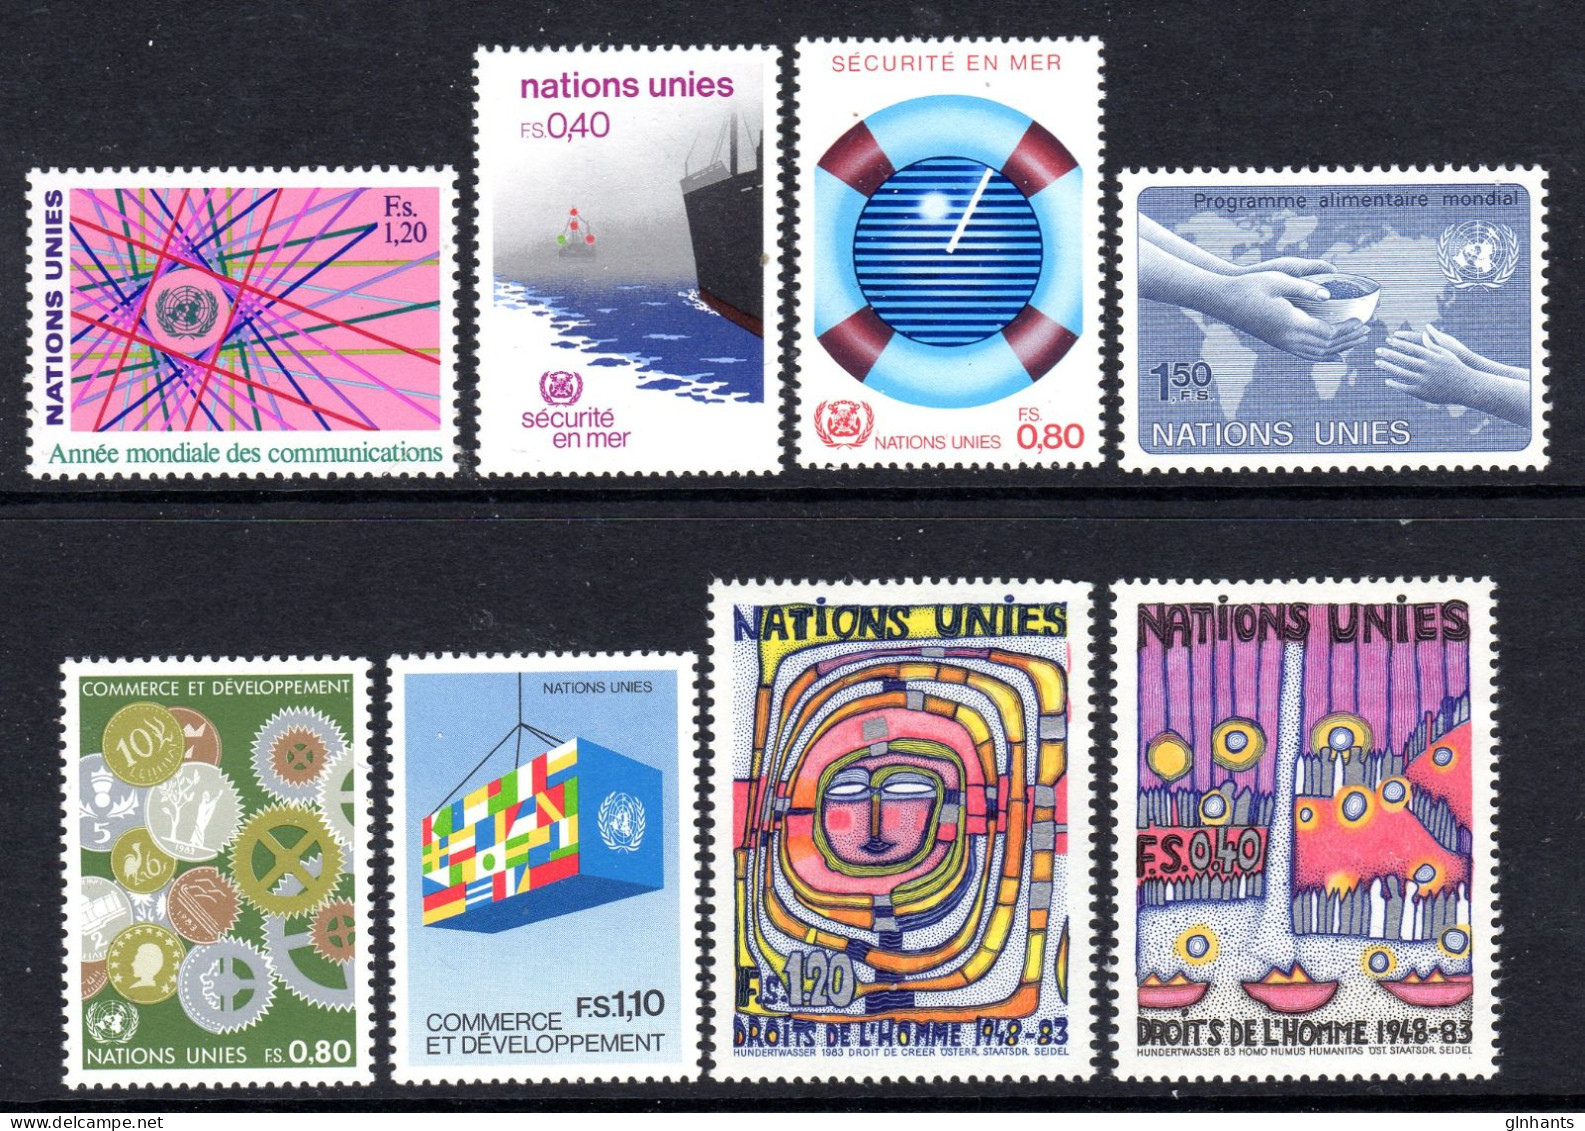 UNITED NATIONS UN GENEVA - 1983 COMPLETE YEAR SET (8V) AS PICTURED FINE MNH ** SG G113-G120 - Neufs